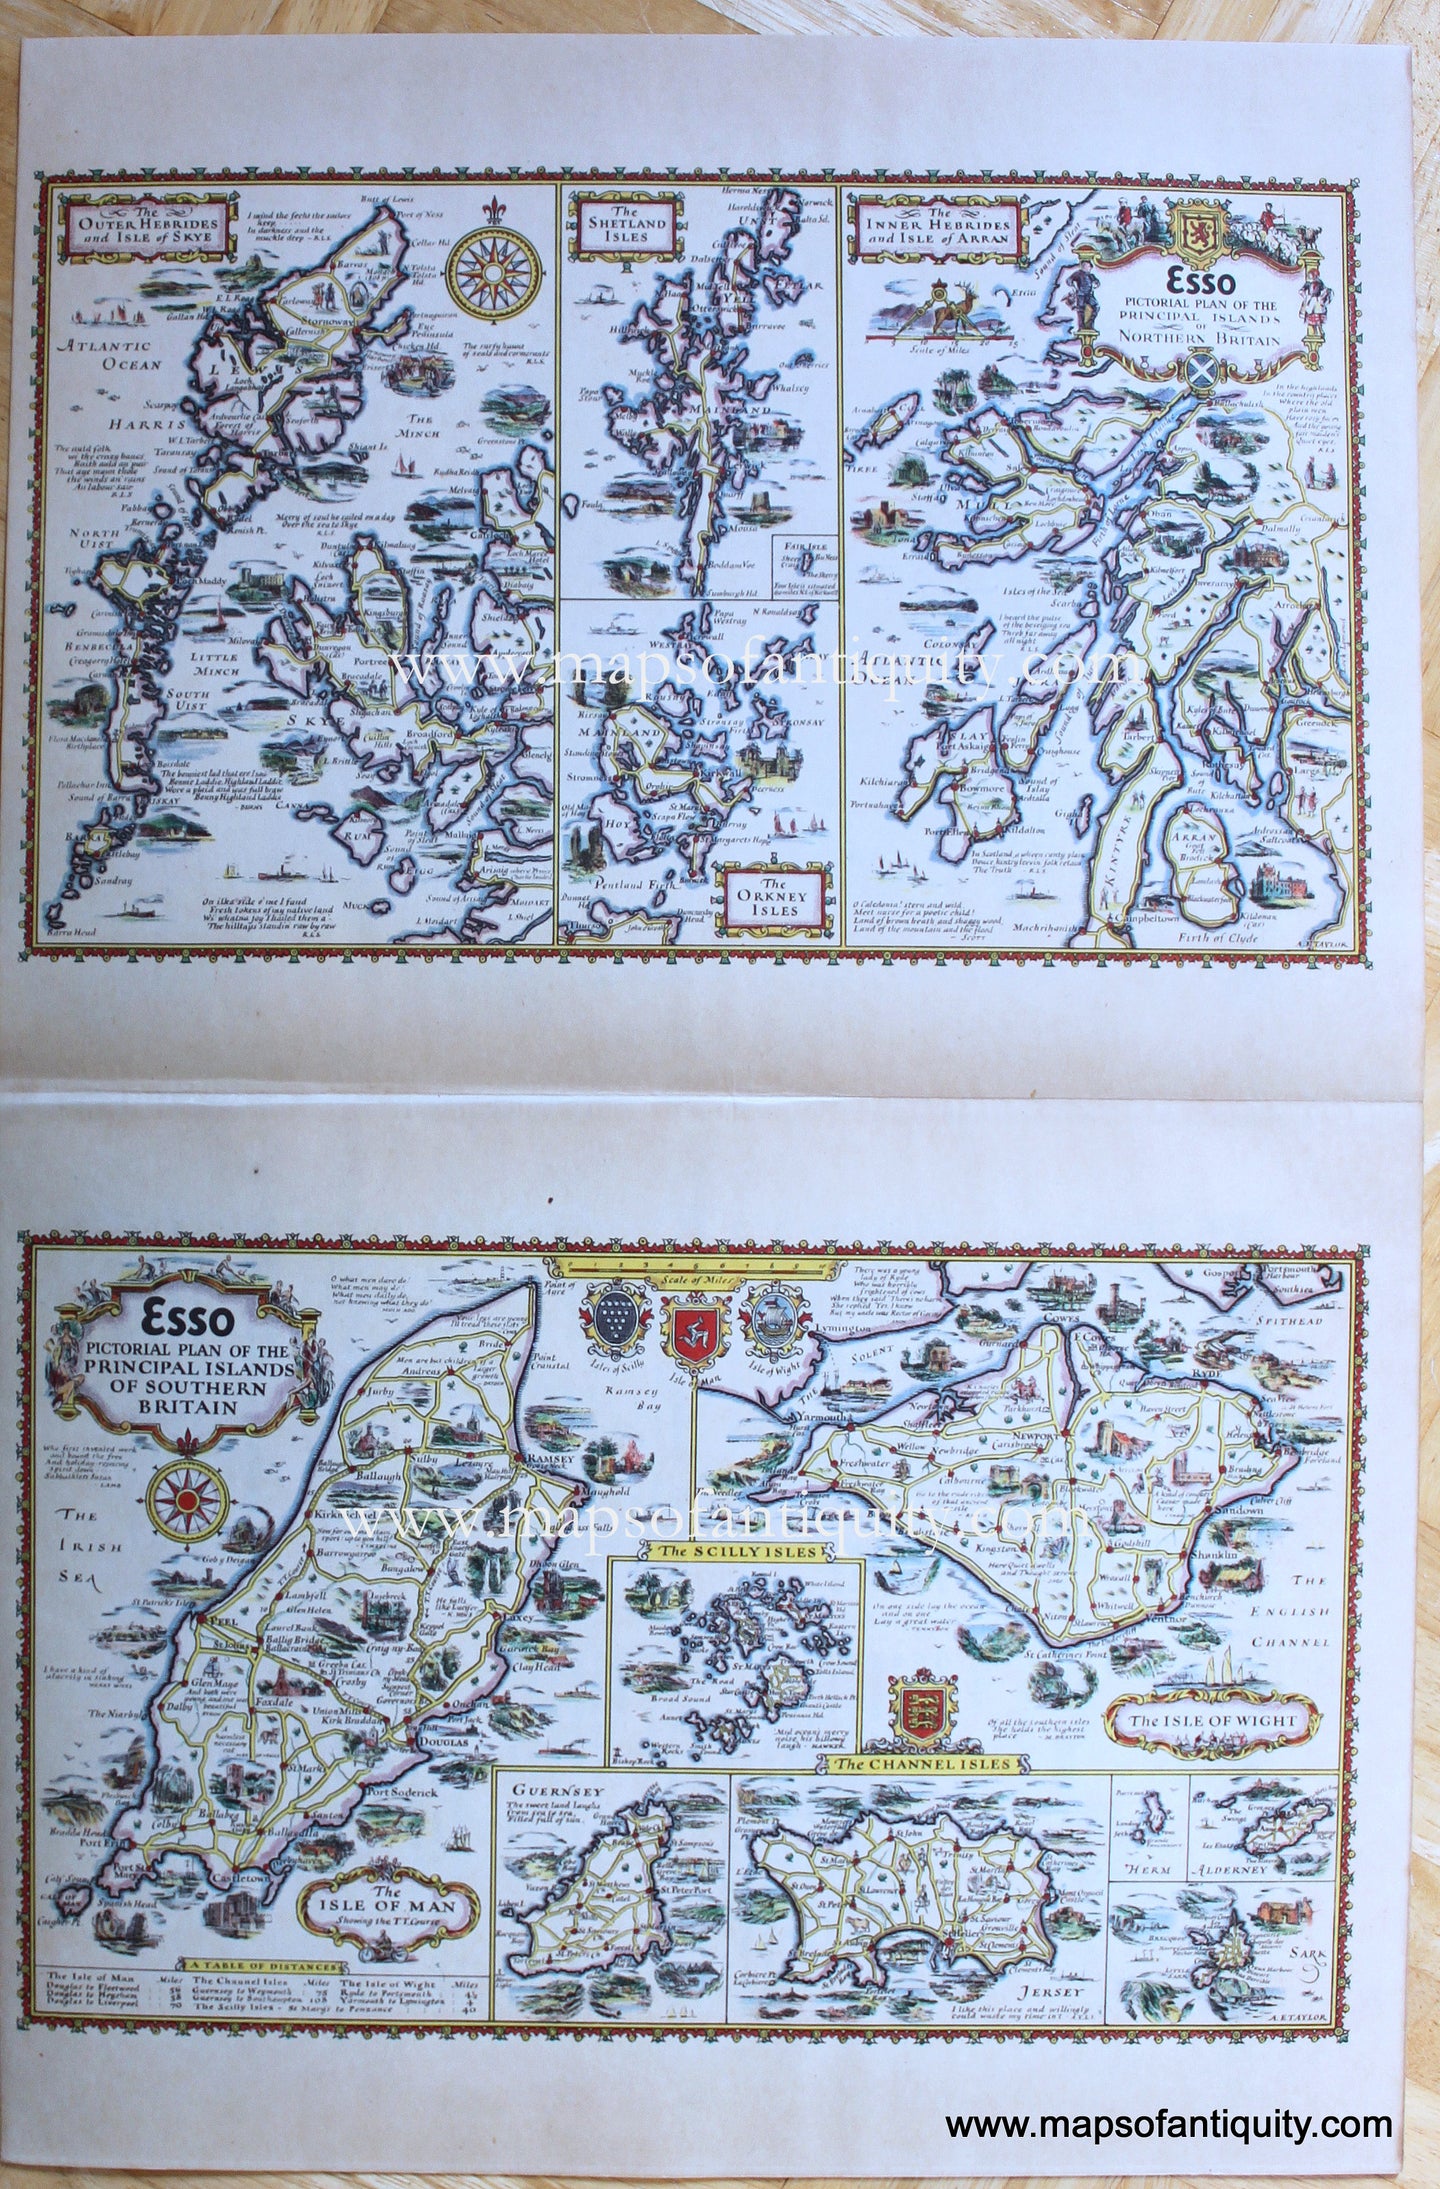 Genuine-Antique-Pictorial-Map-Esso-Pictorial-Plans-of-British-Islands-1932-A.E.-Taylor-Maps-Of-Antiquity